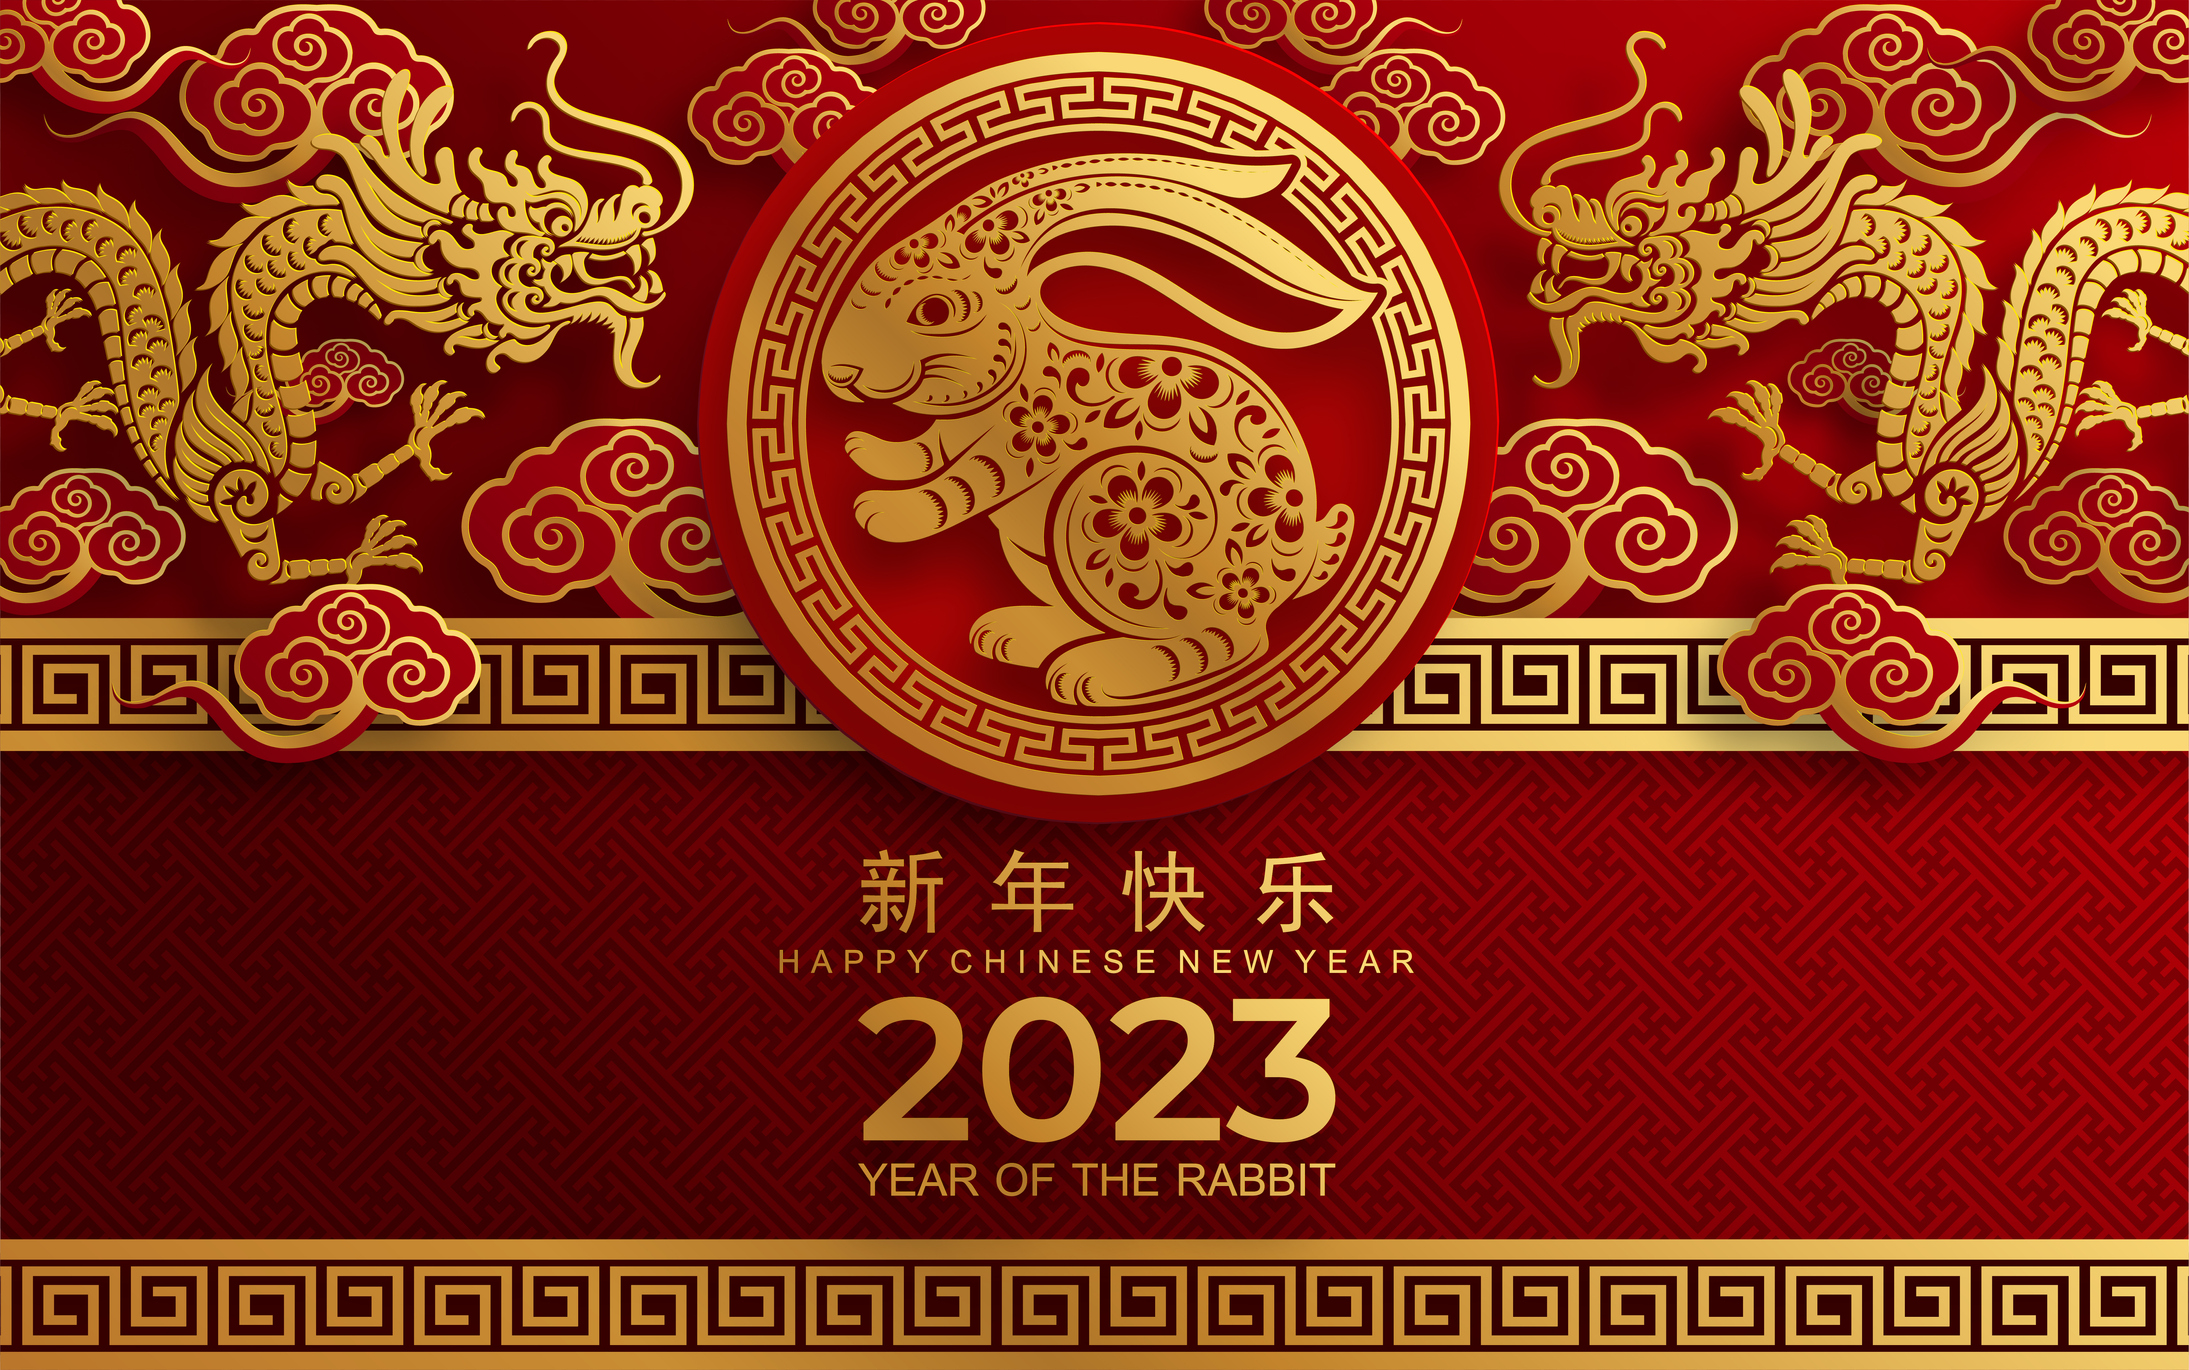 Year of the Rabbit: Chinese New Year